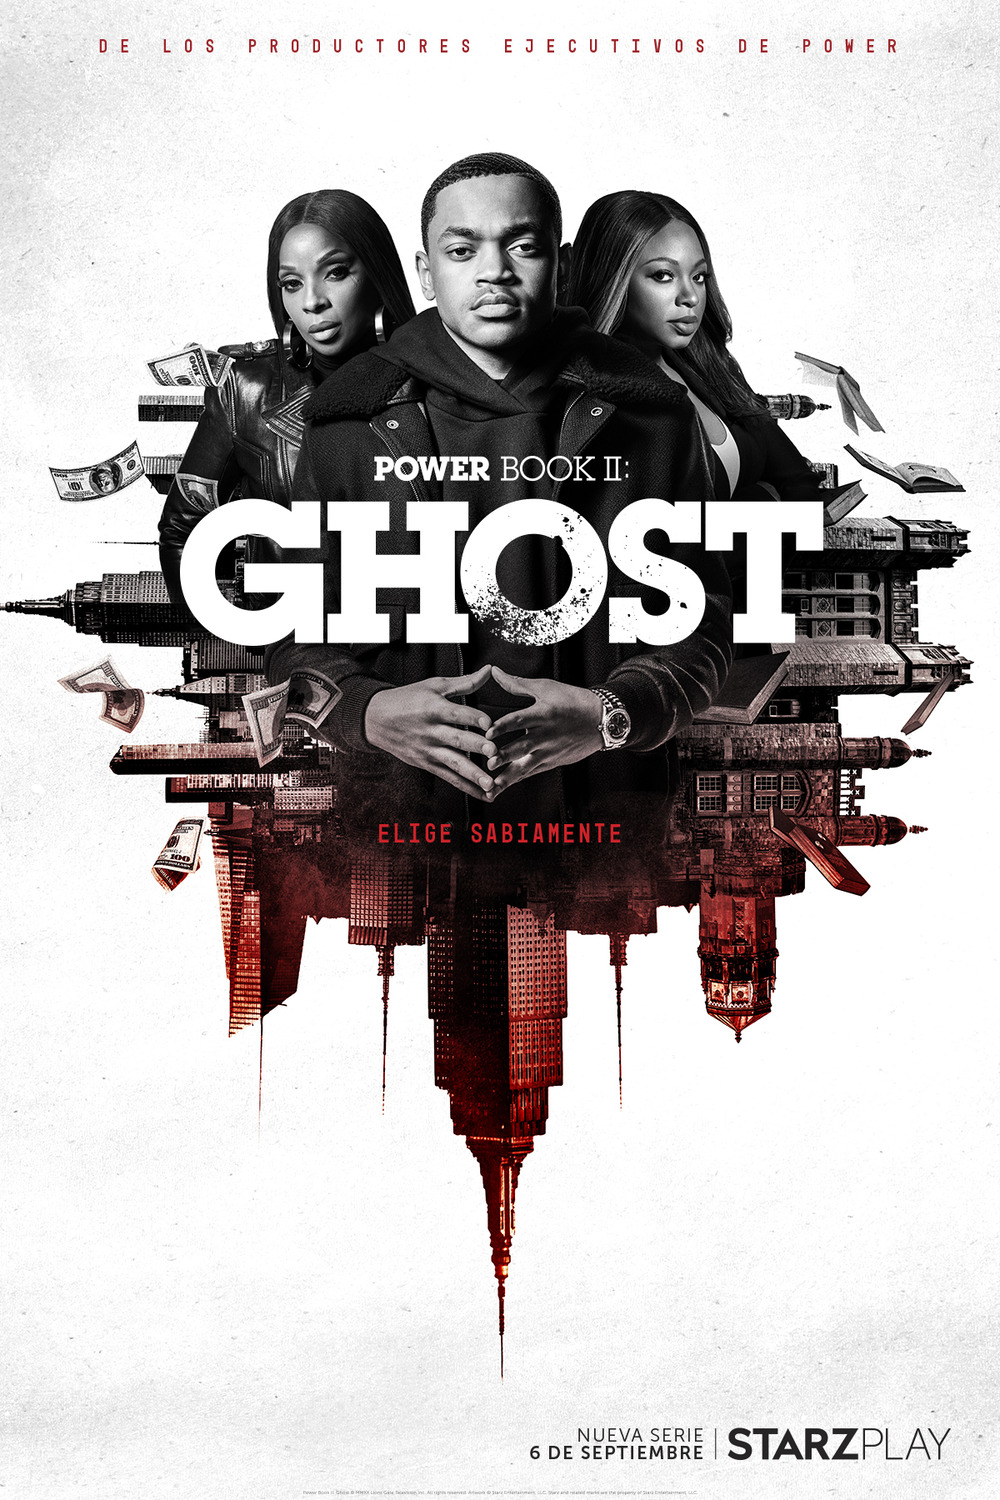 Extra Large TV Poster Image for Power Book II: Ghost (#2 of 14)